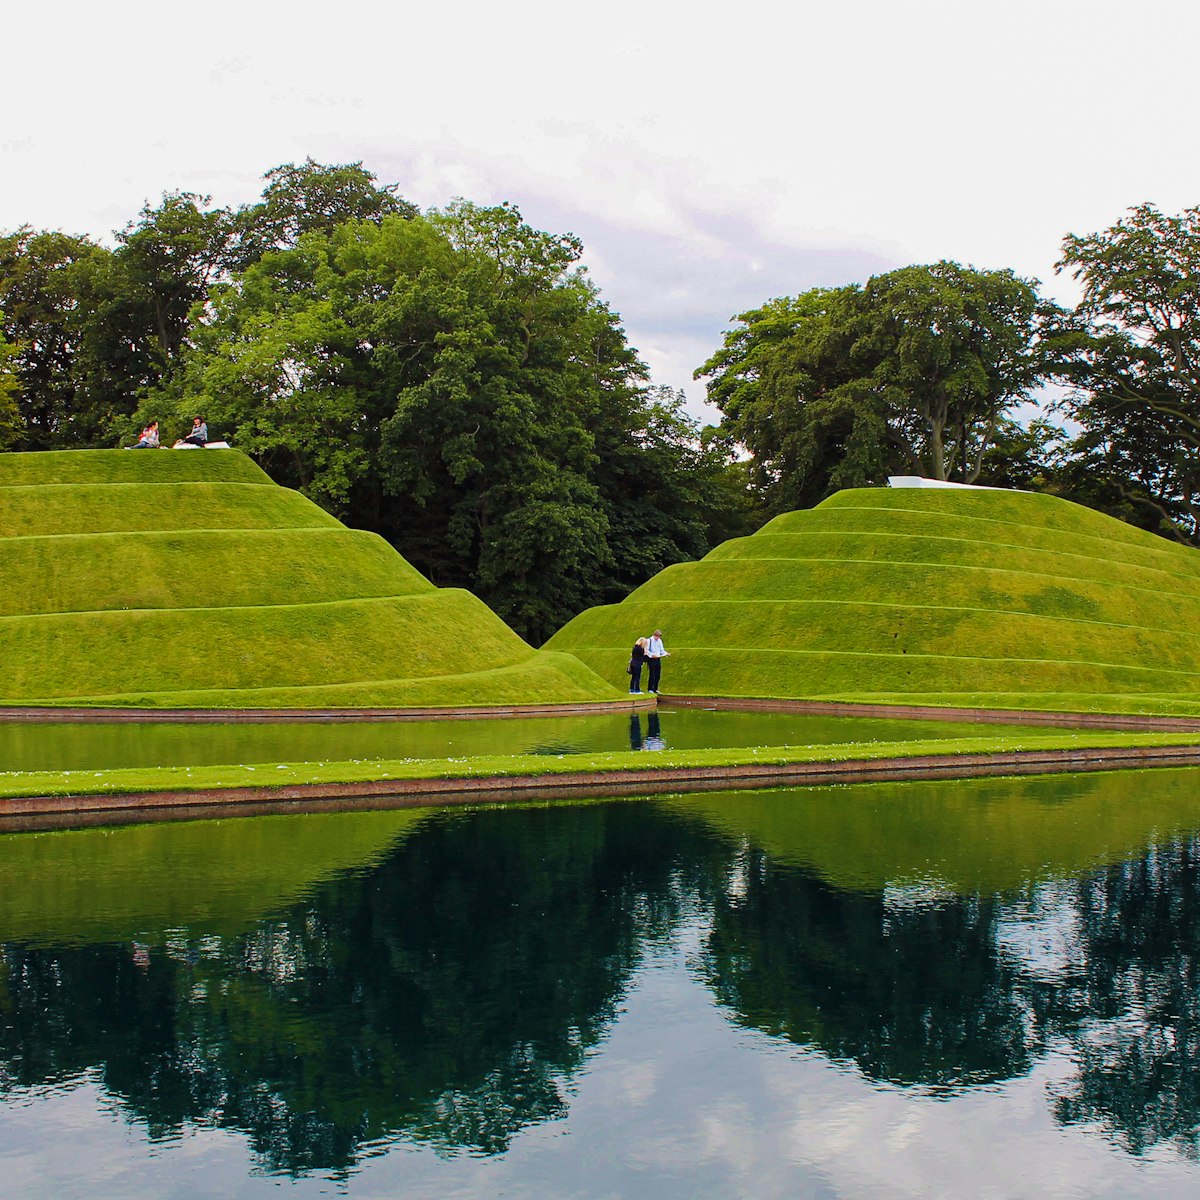 Edinburgh, Scotland - August 20, 2019, Jupiter Artland is a large unusual park with garden, rivers and sculptures; Shutterstock ID 1790431646; full: Digital; gl: 65050; netsuite: POI; your: Barbara Di Castro
1790431646